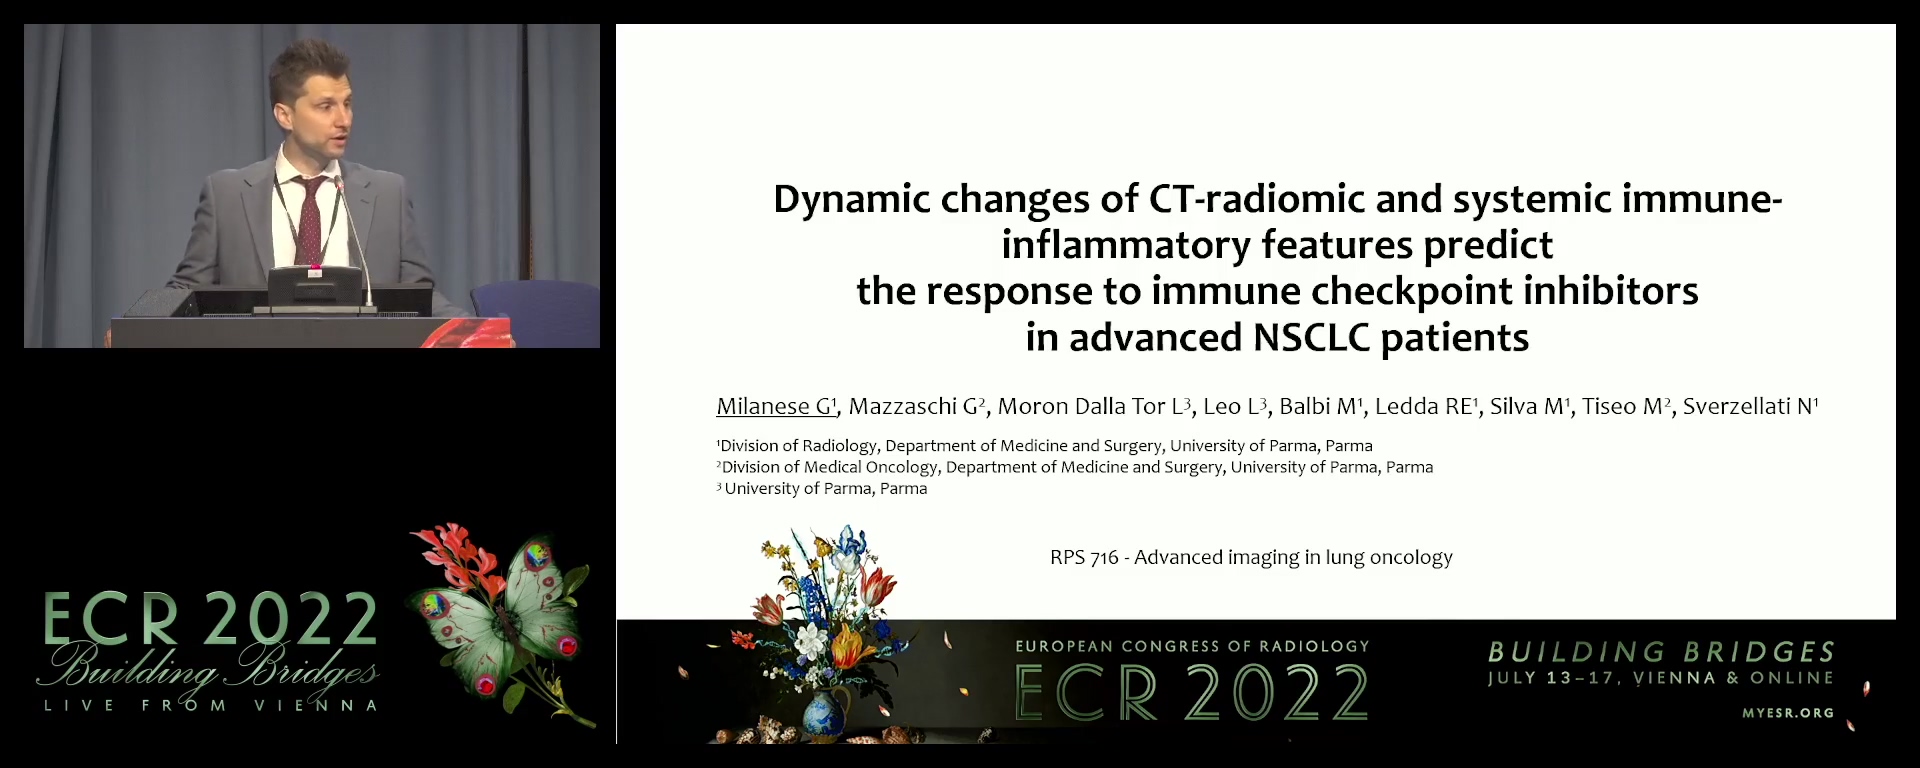 Dynamic changes of CT-radiomic and systemic immune-inflammatory features predict the response to immune checkpoint inhibitors in advanced NSCLC patients - Gianluca Milanese, Parma / IT